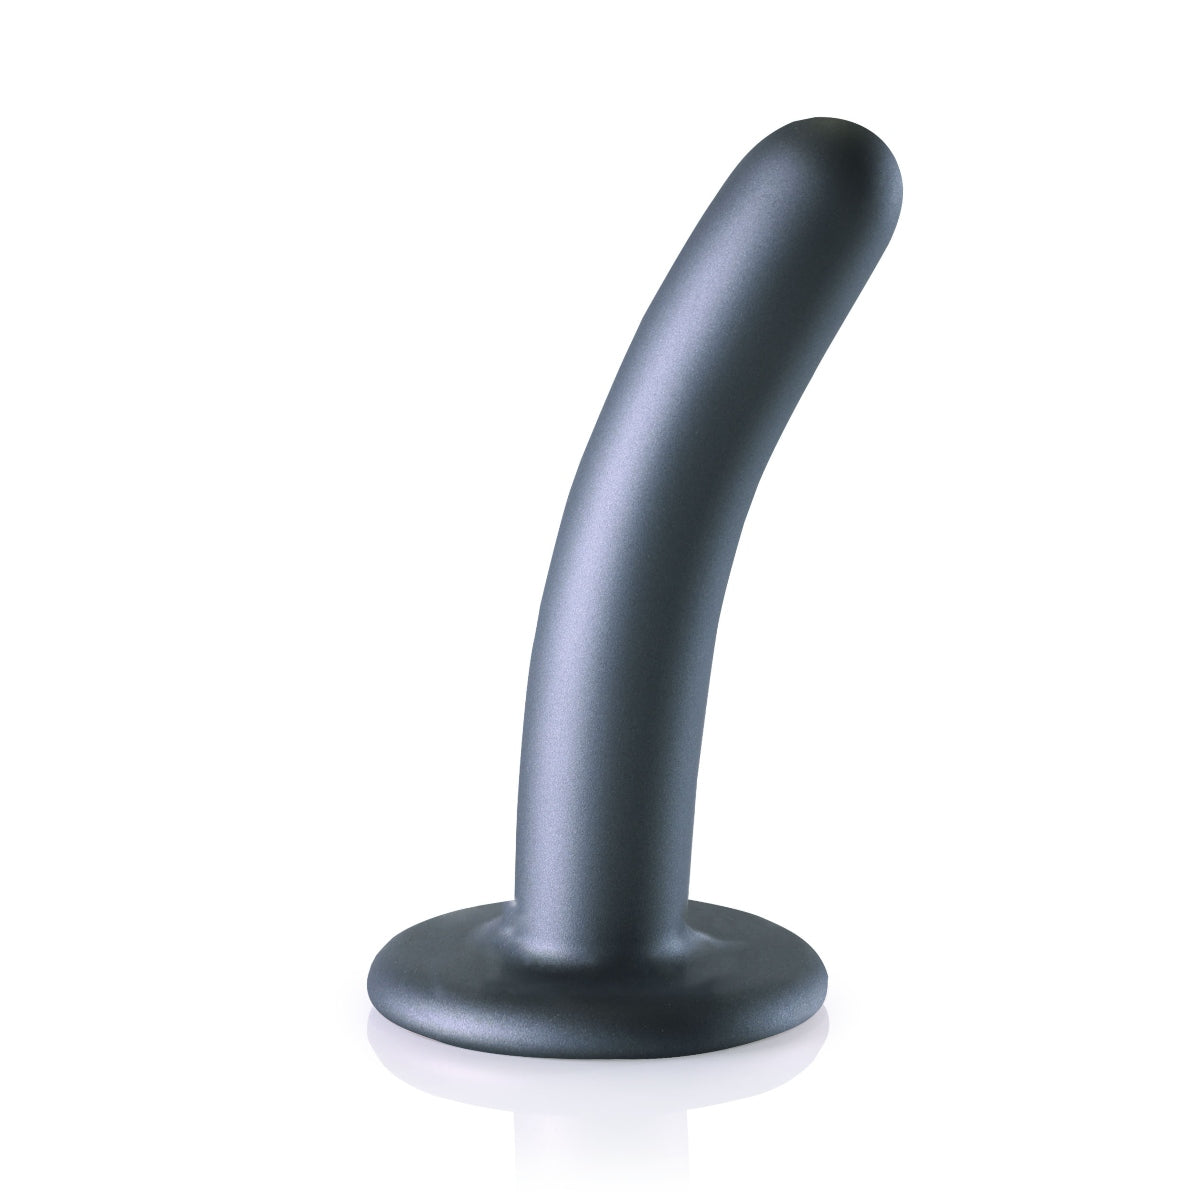 Ouch Smooth Silicone G Spot Dildo 5" - Metallic Grey - Discover Pleasure